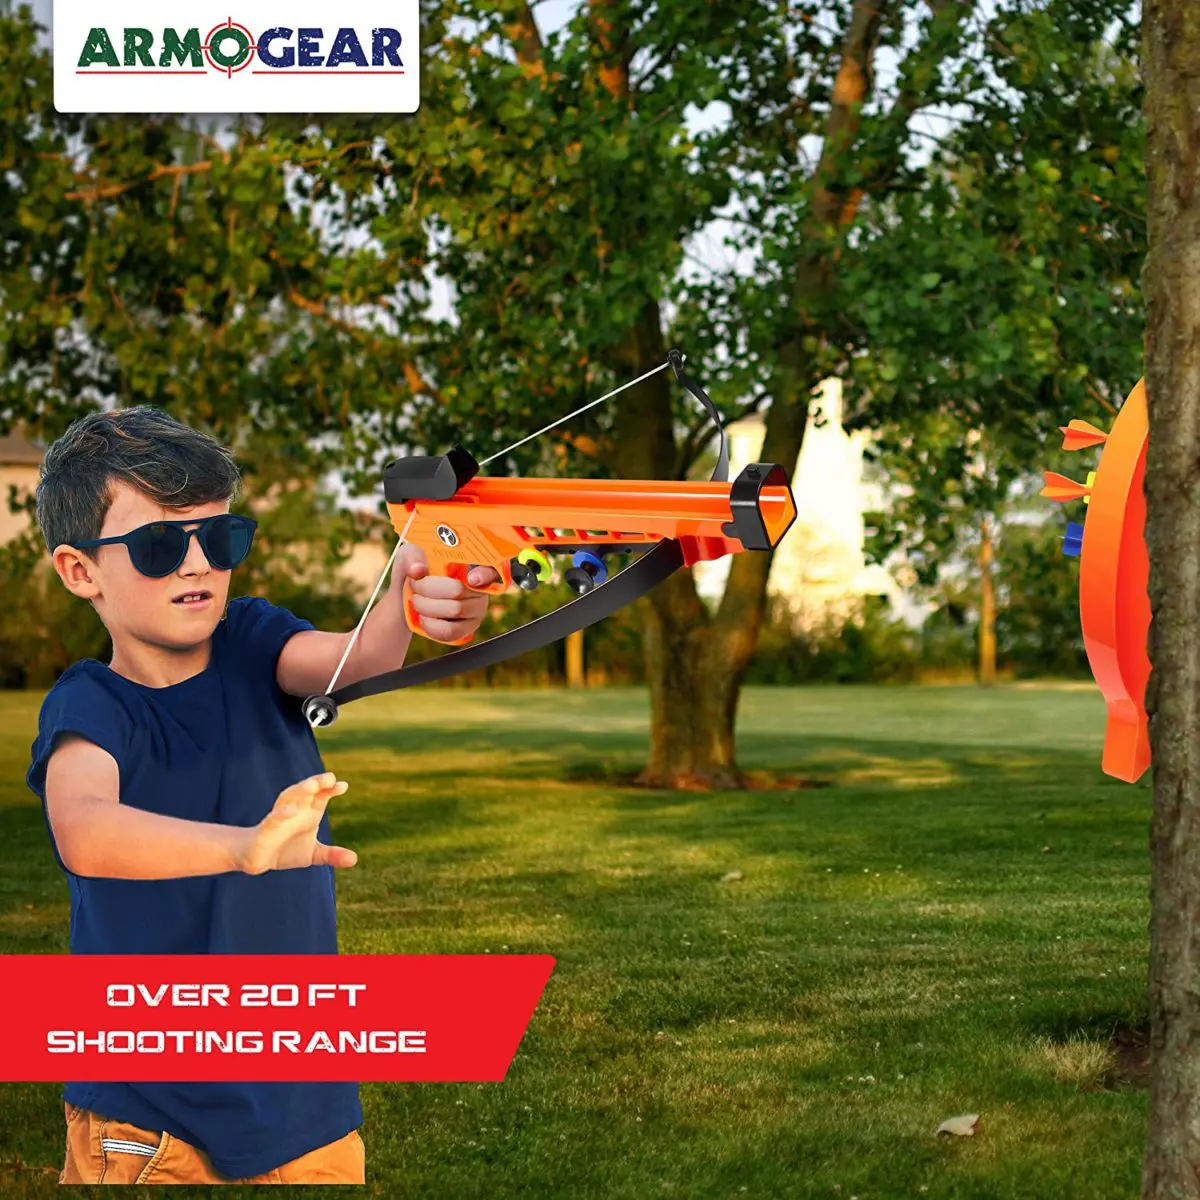 ArmoGear Kids Archery Set - Top Toys and Gifts for Ten Year Old Boys 2